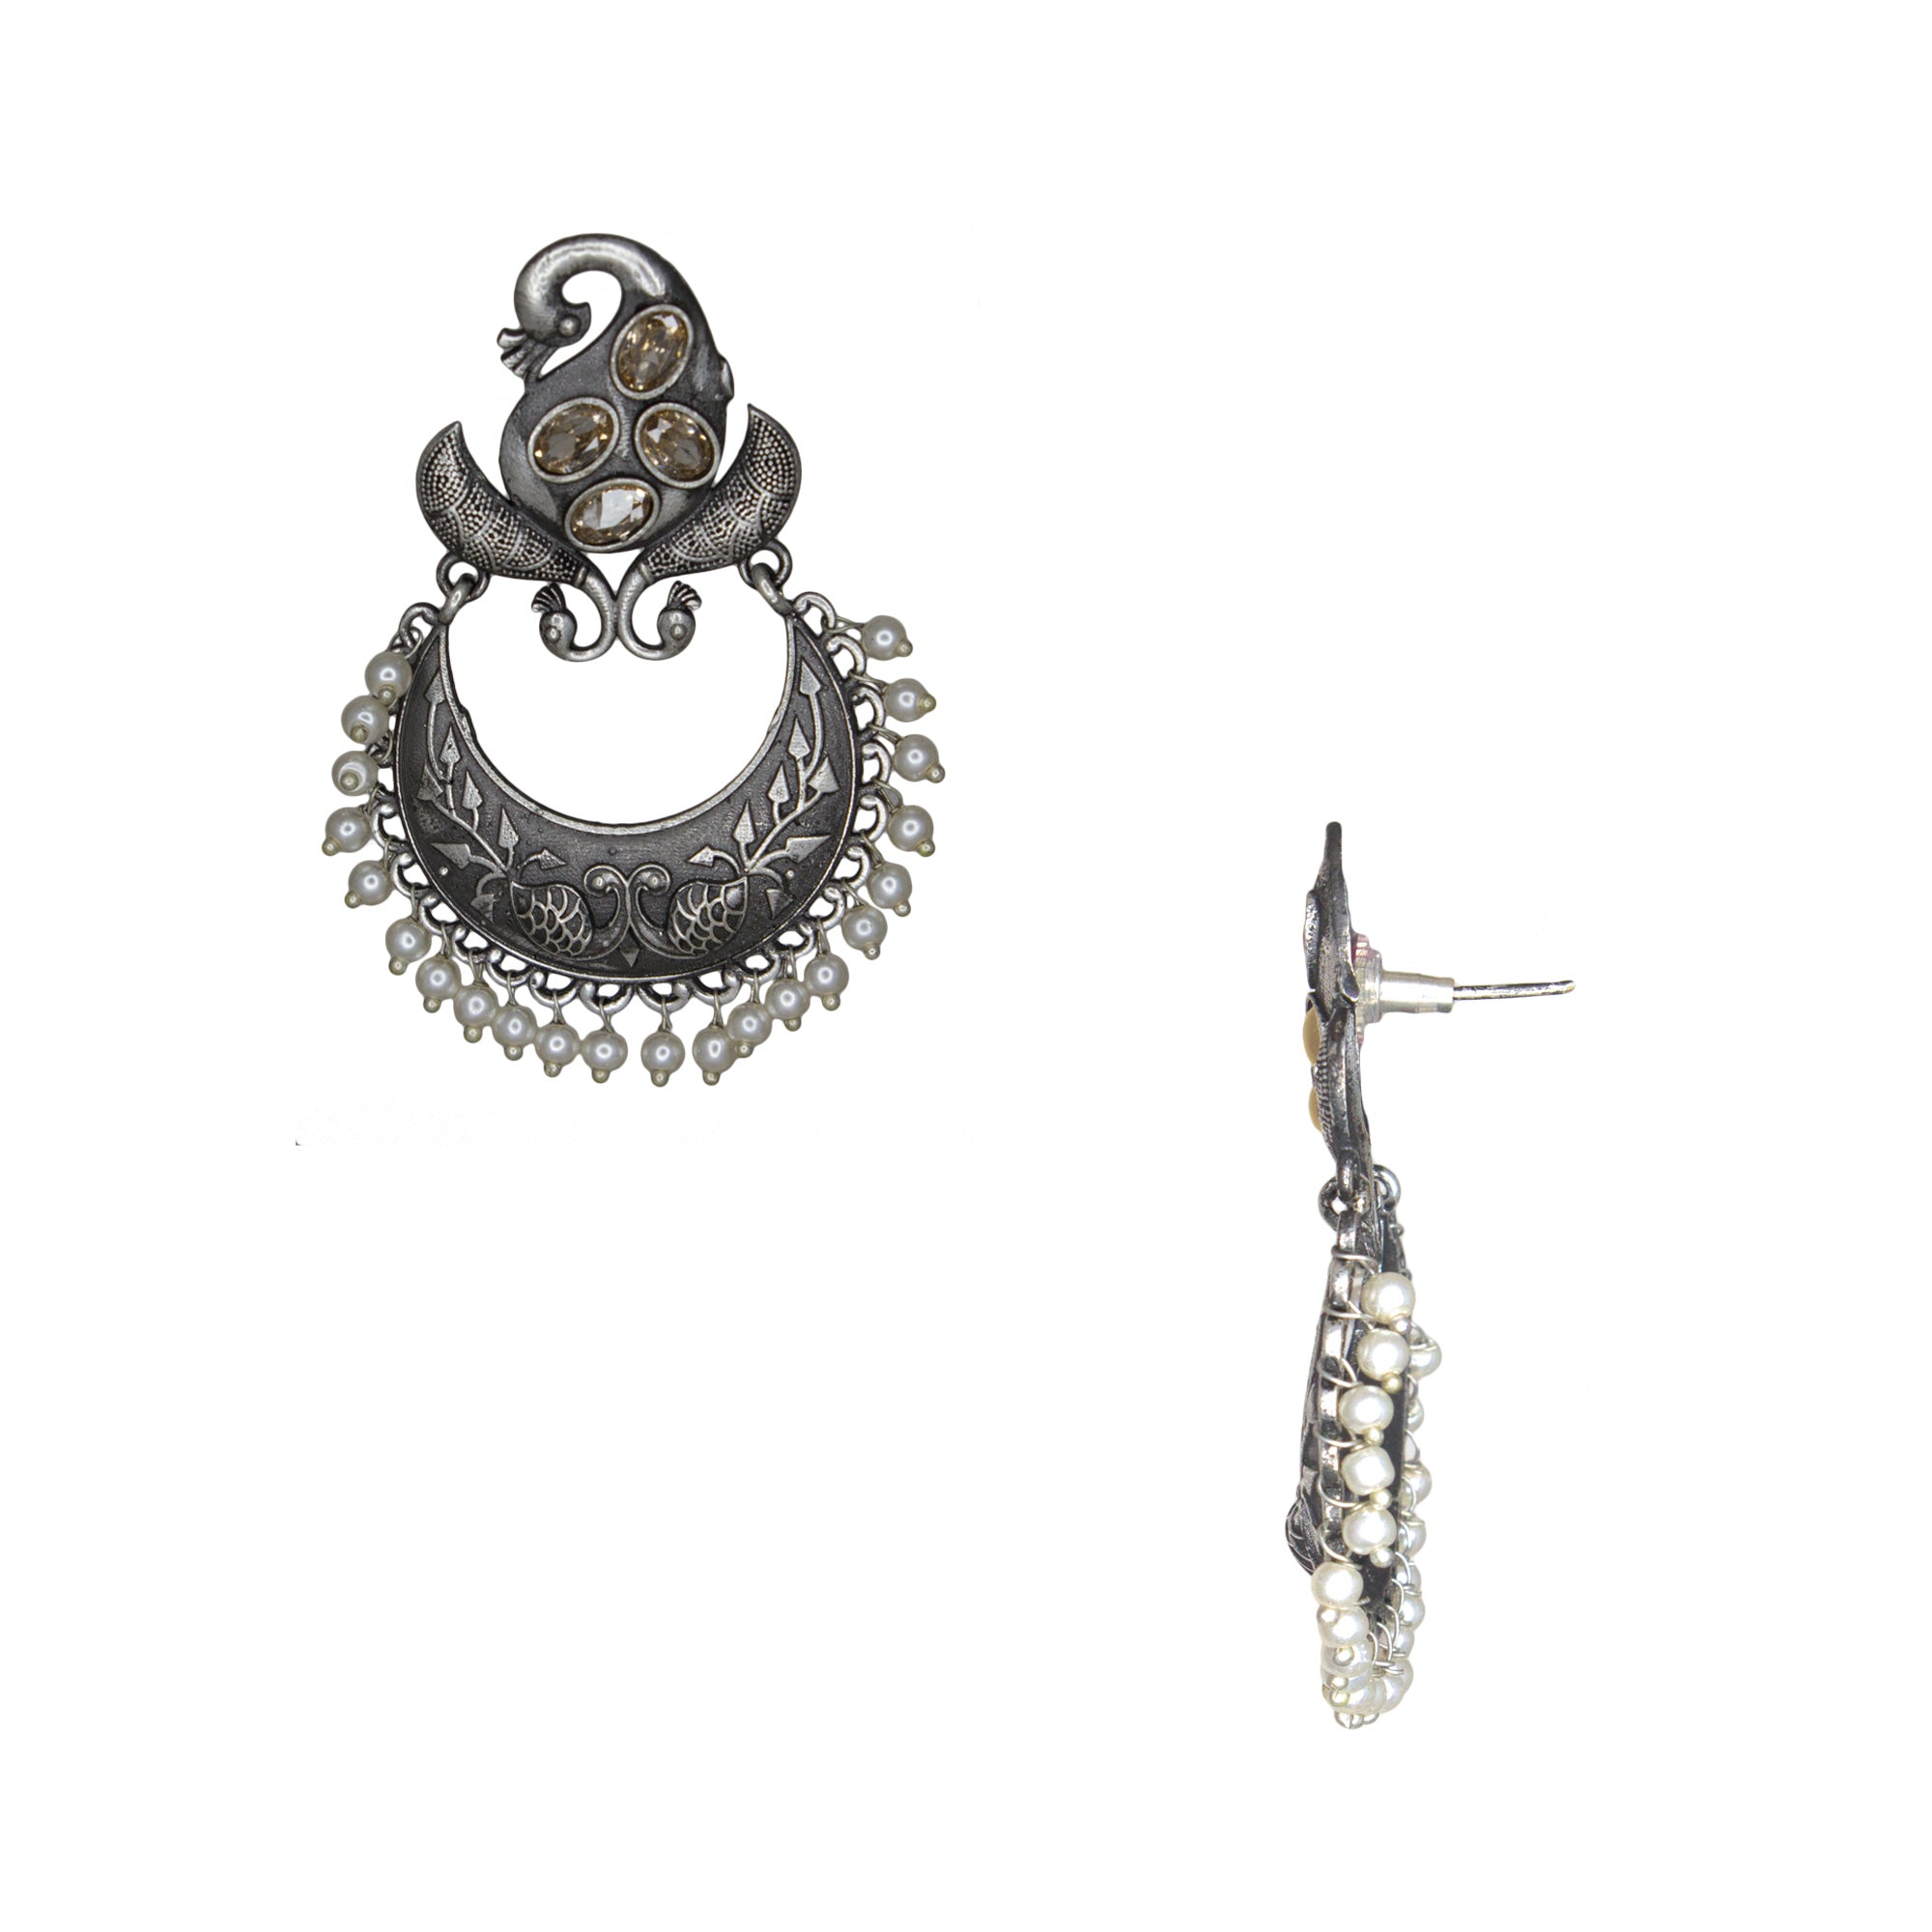 Silver lookalike Peacock Design Studs With Yellow Stones Studded Earrings for Women